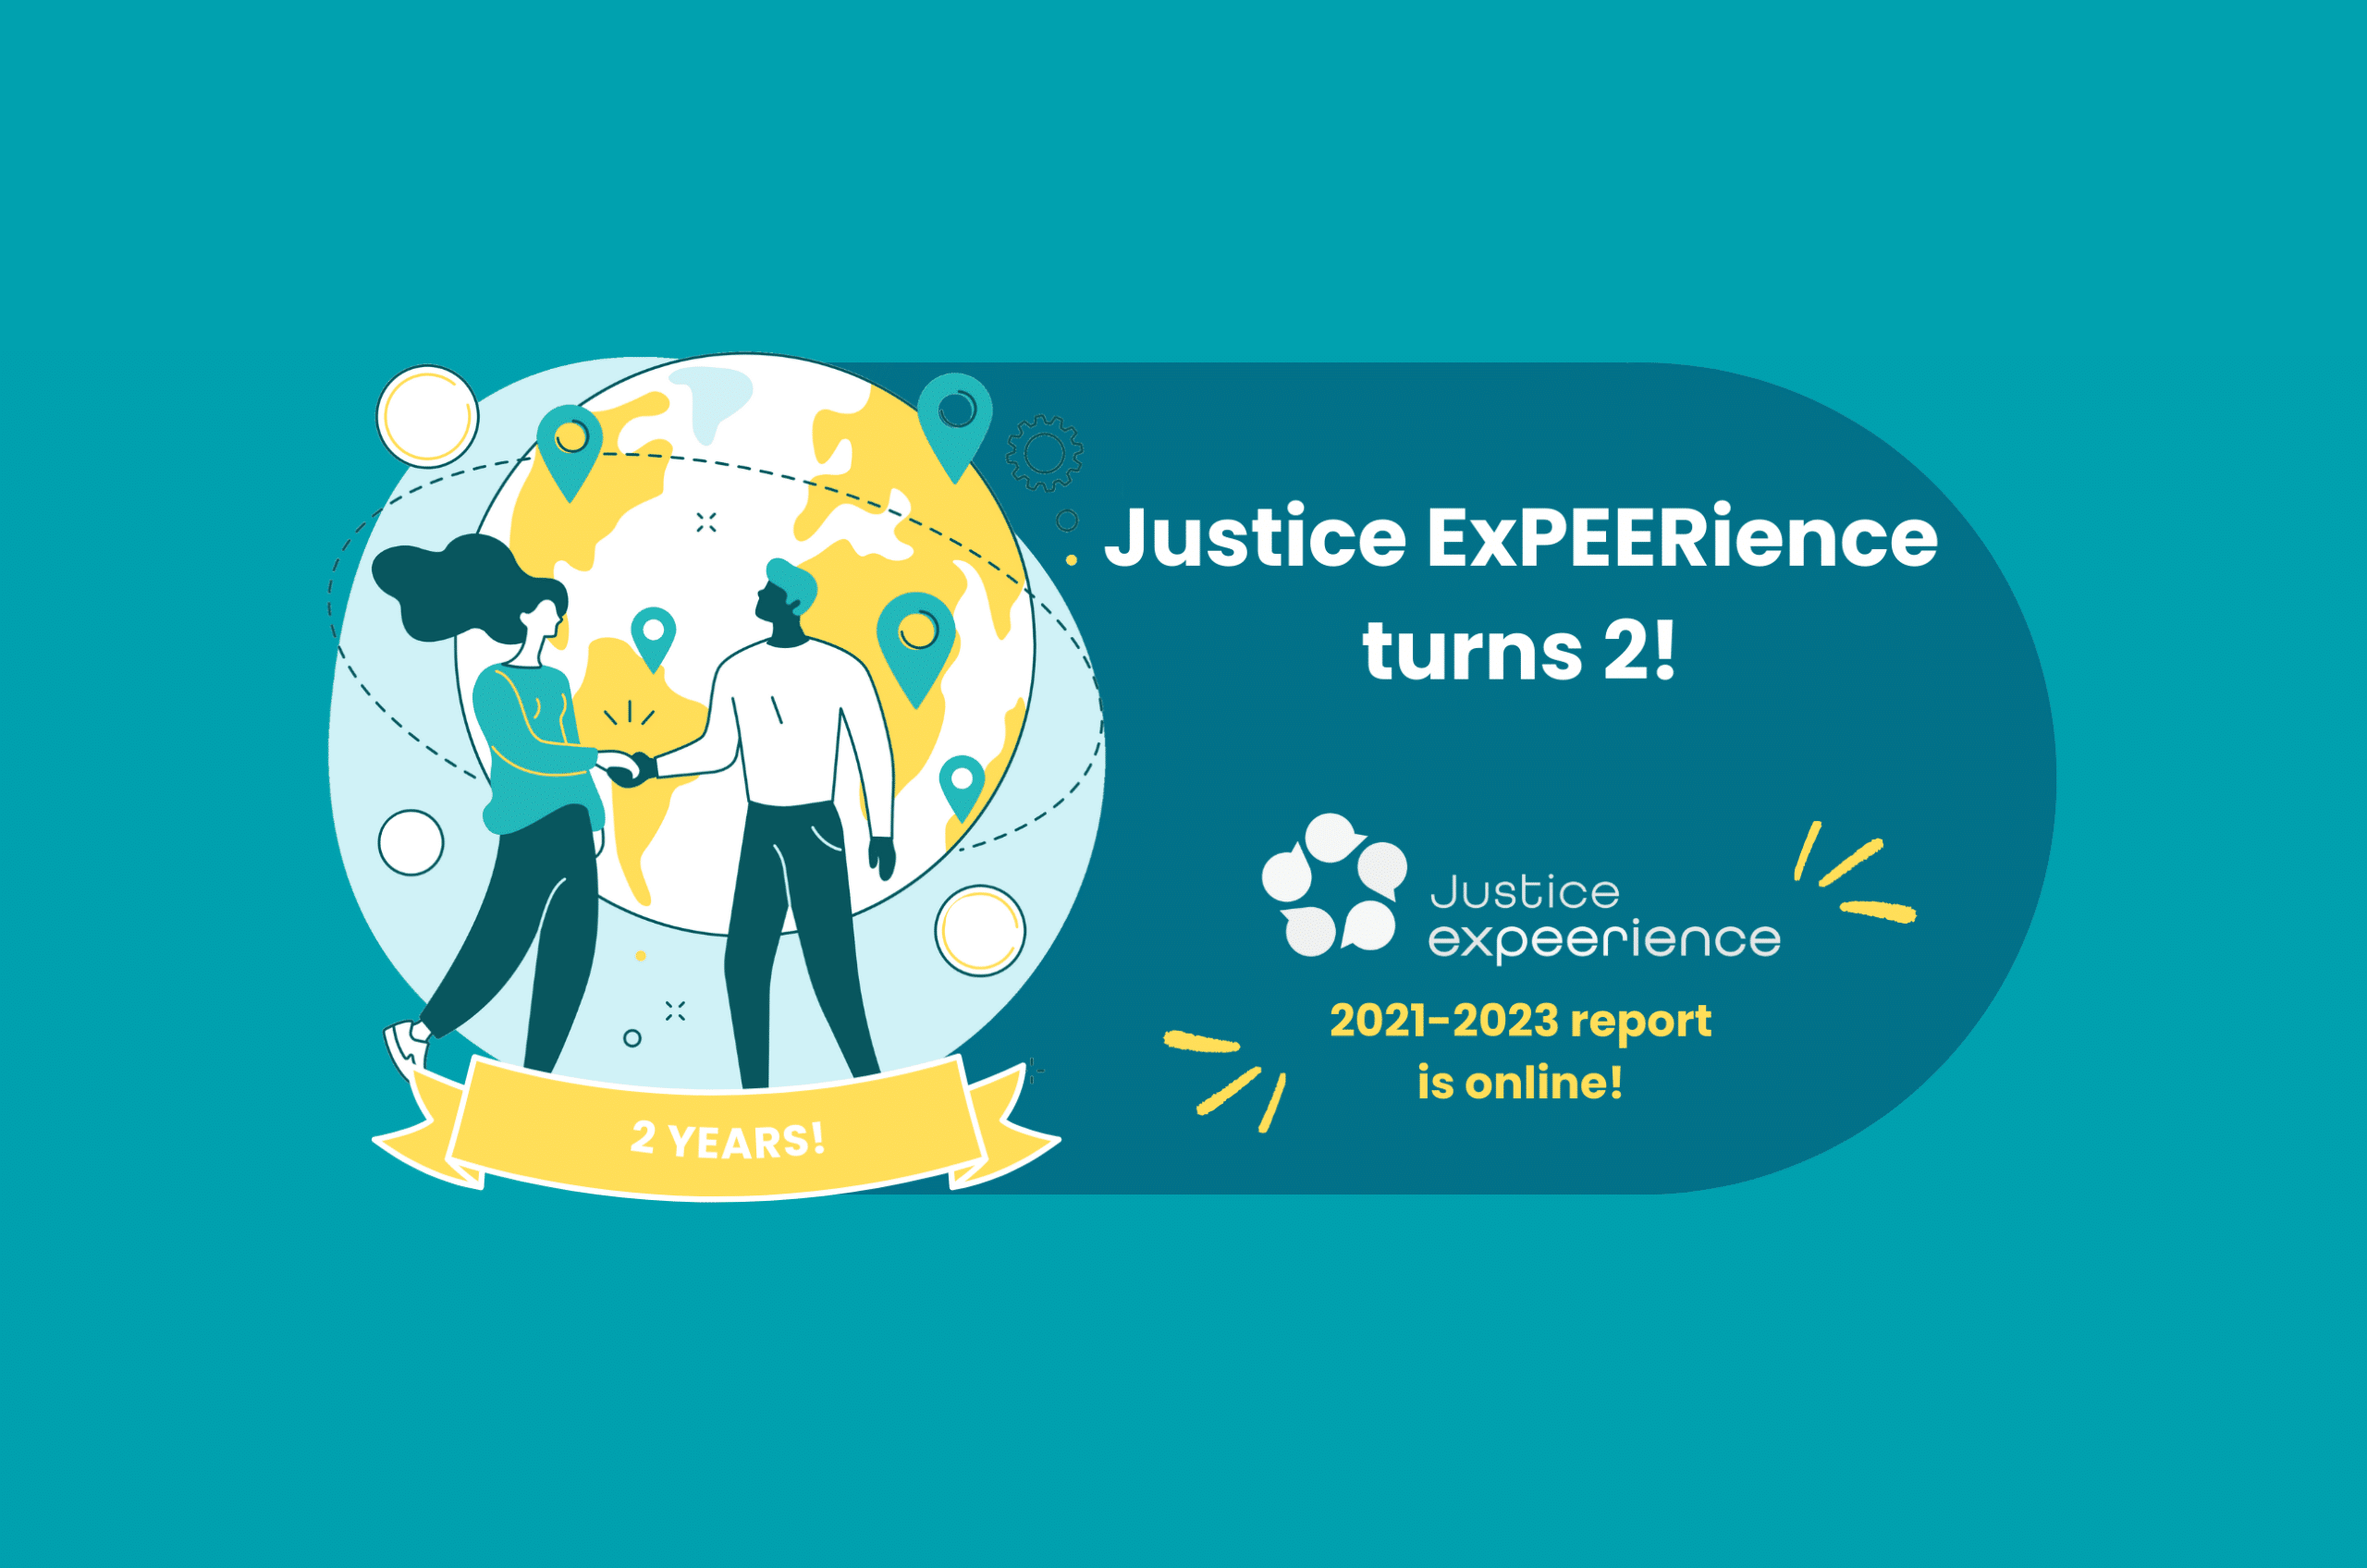 Justice ExPEERience, the human rights network launched by ASF, celebrates its second anniversary